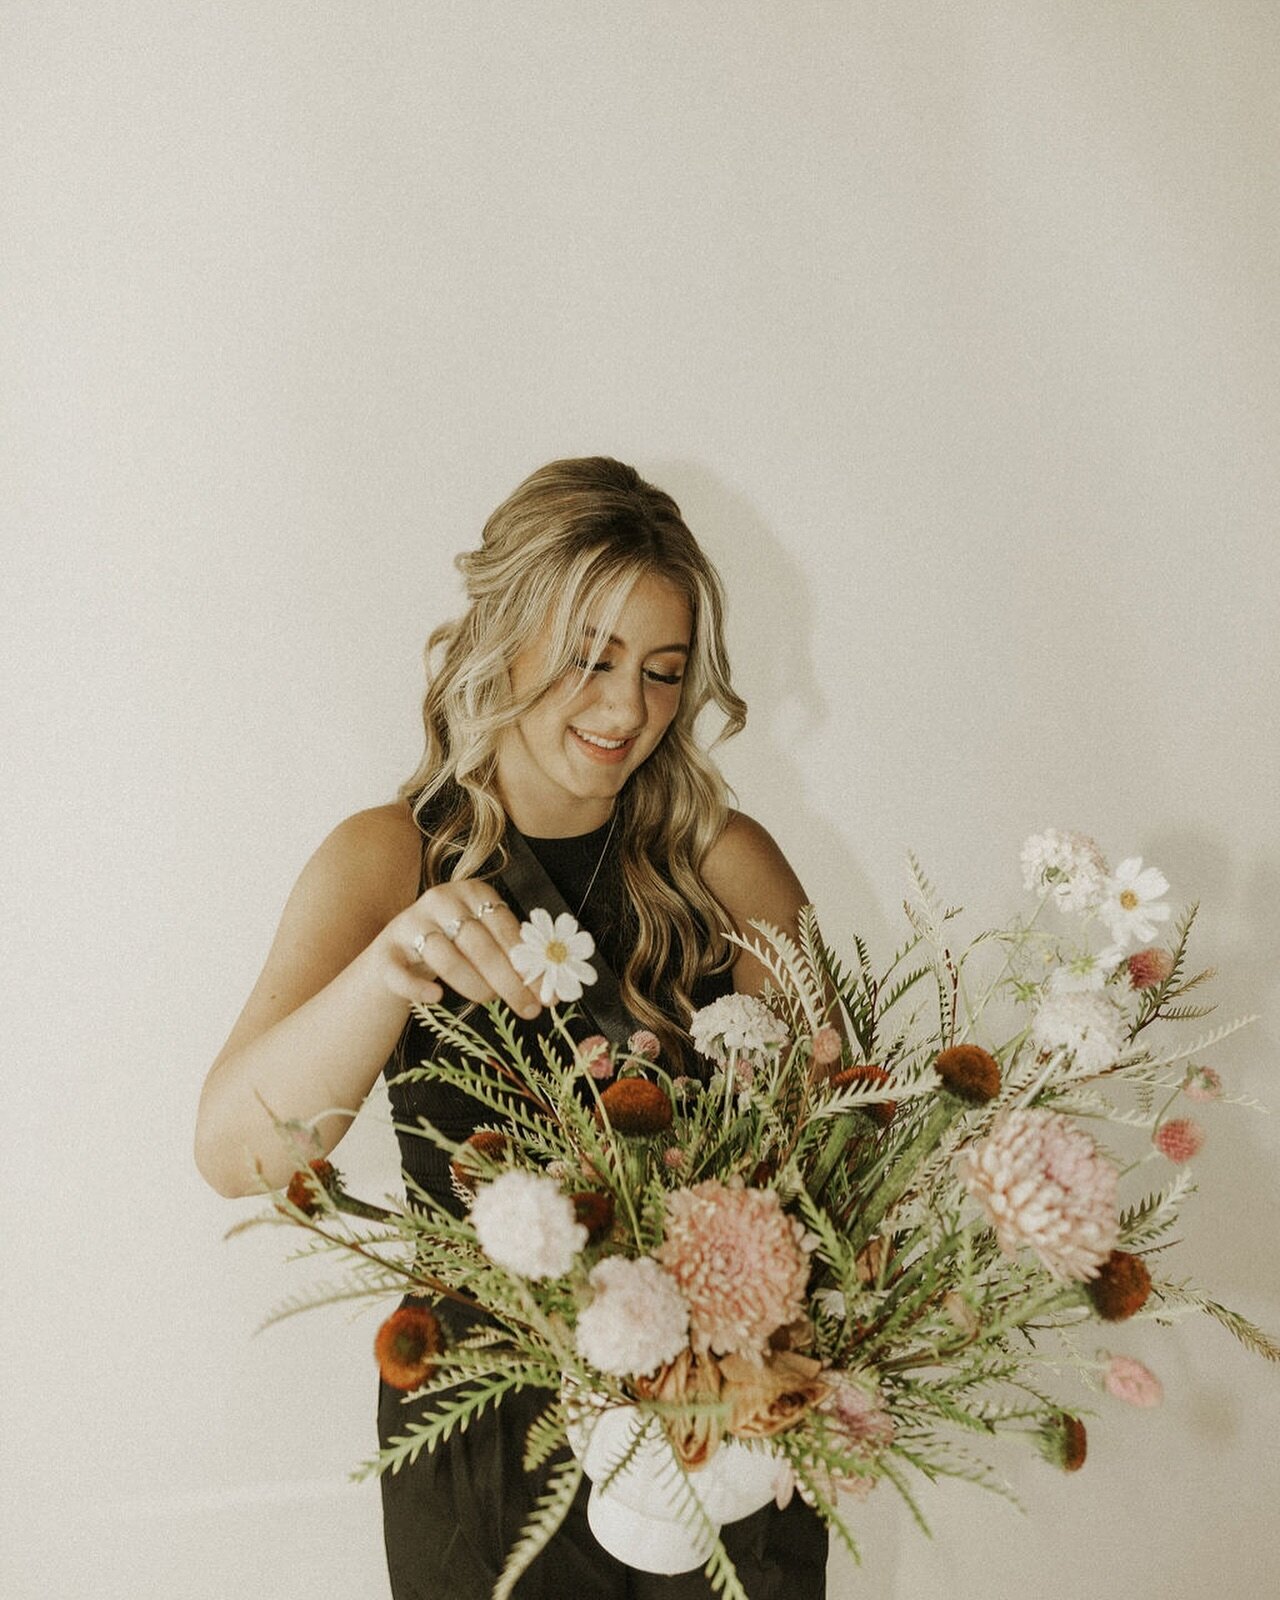 Flowers make everything better 🌷

As wedding planners, we get asked all the time, &ldquo;What is your favorite part of the wedding day?&rdquo; 

What does Emma have to say? The florals! Florals truly dress up a wedding from the bouquets to the table